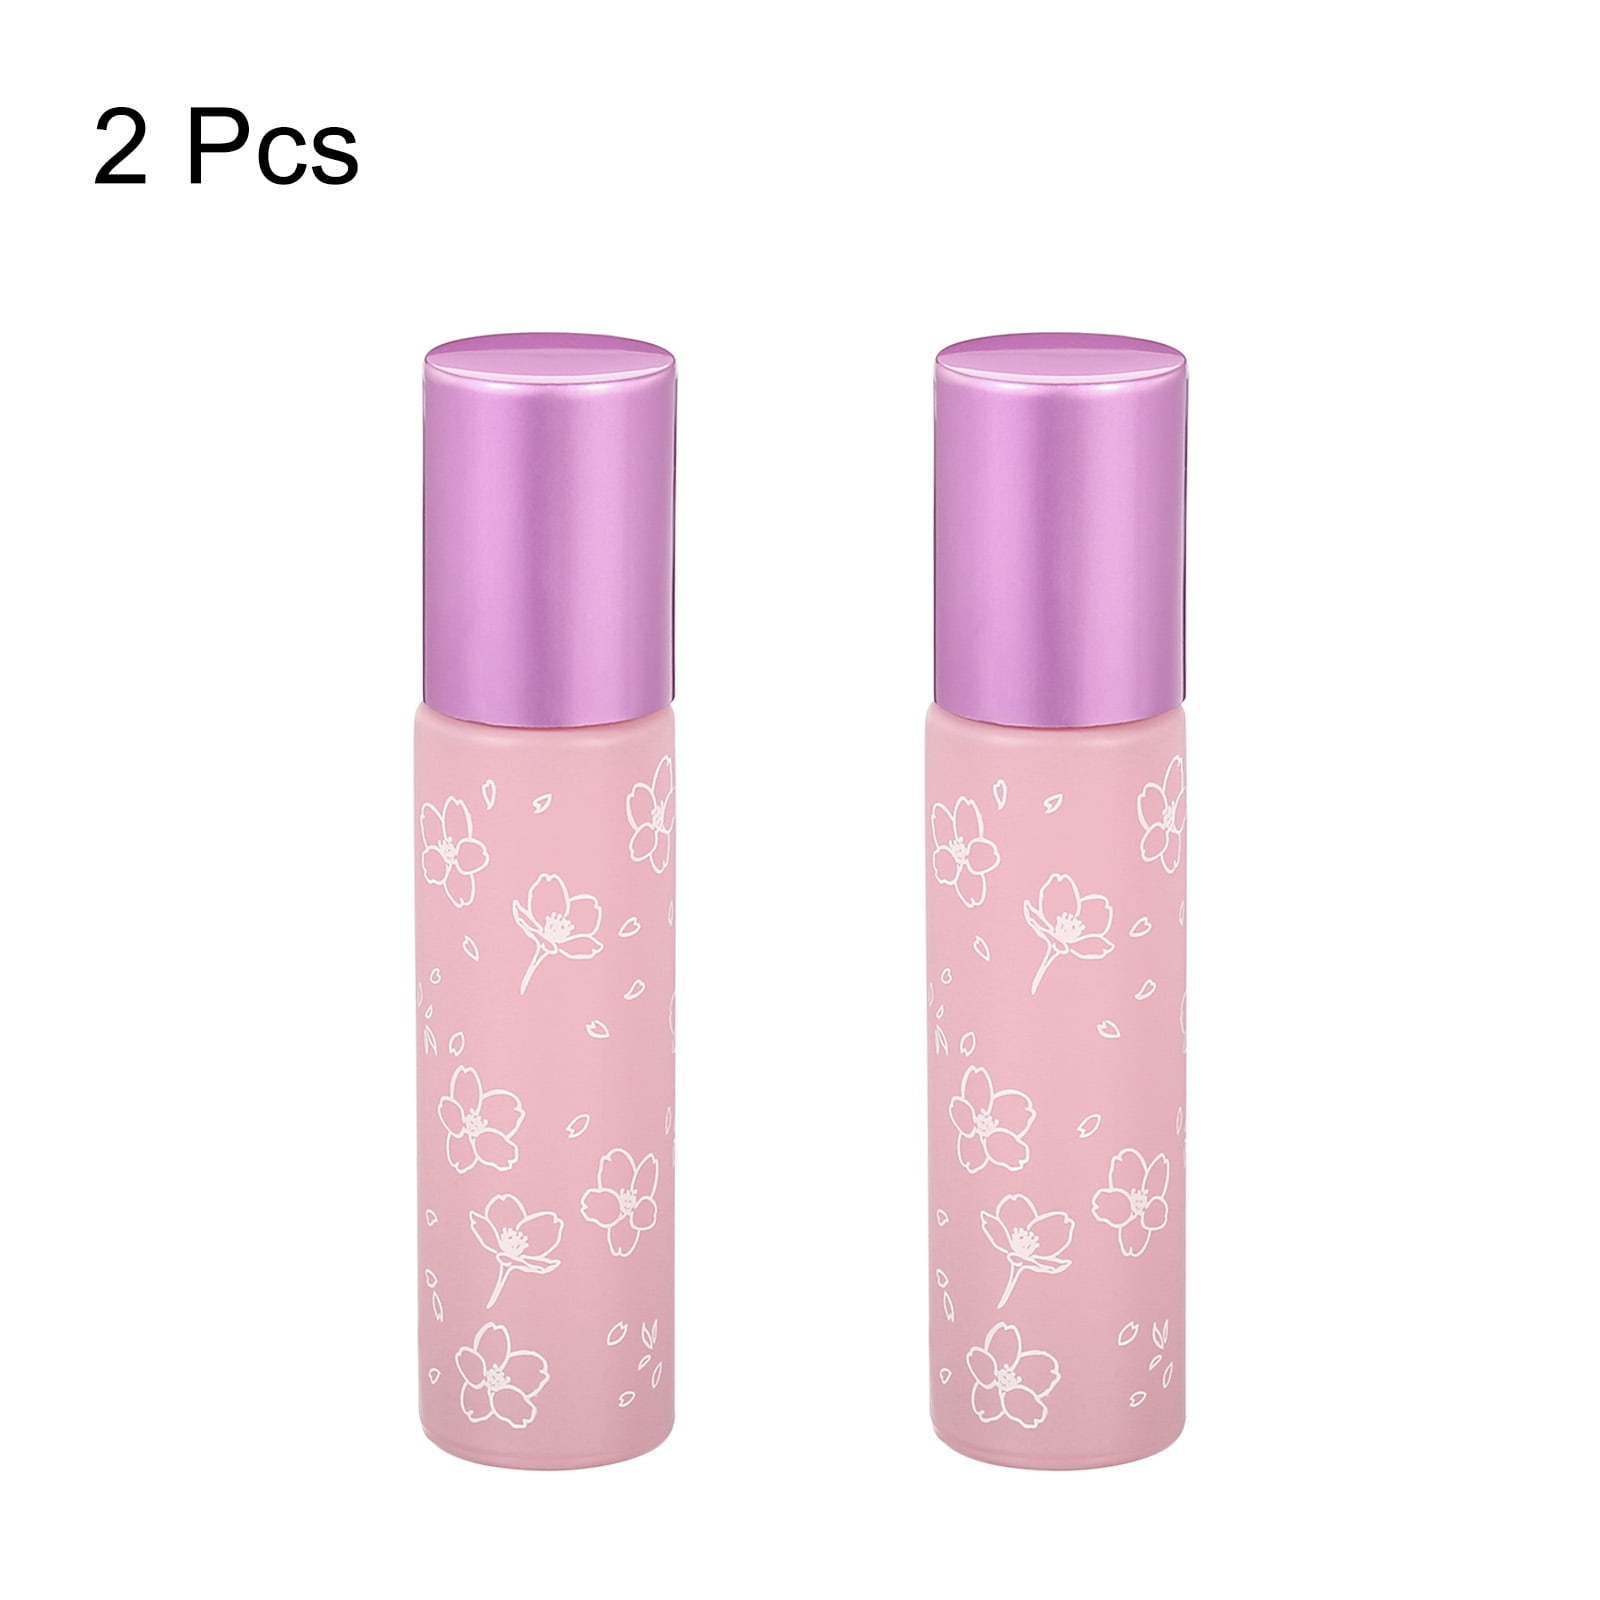 10 ml Oil Rollerball - Cocoapink